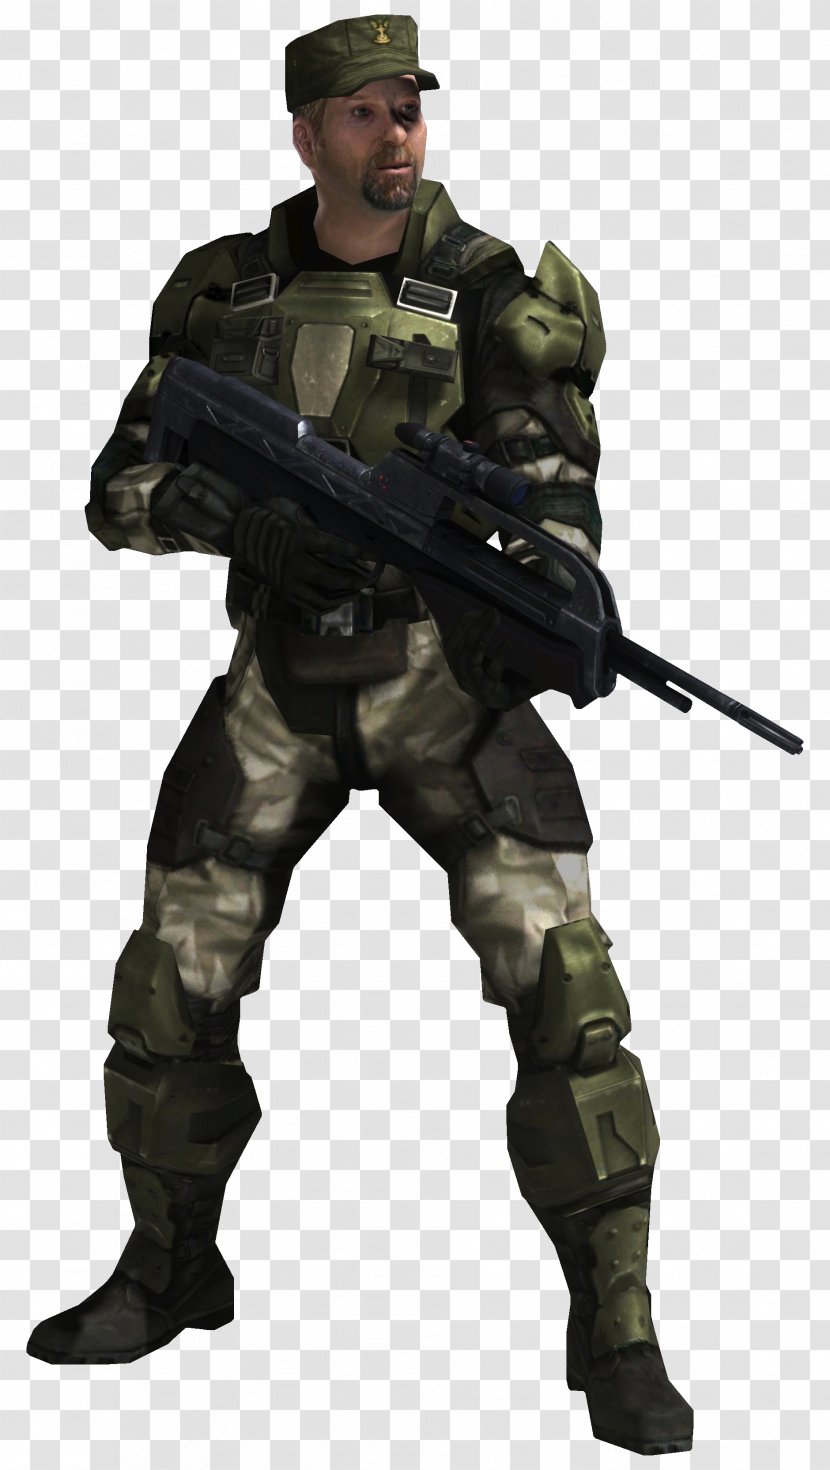 Halo 3 Halo: Reach 2 5: Guardians Soldier - Military Police Transparent PNG